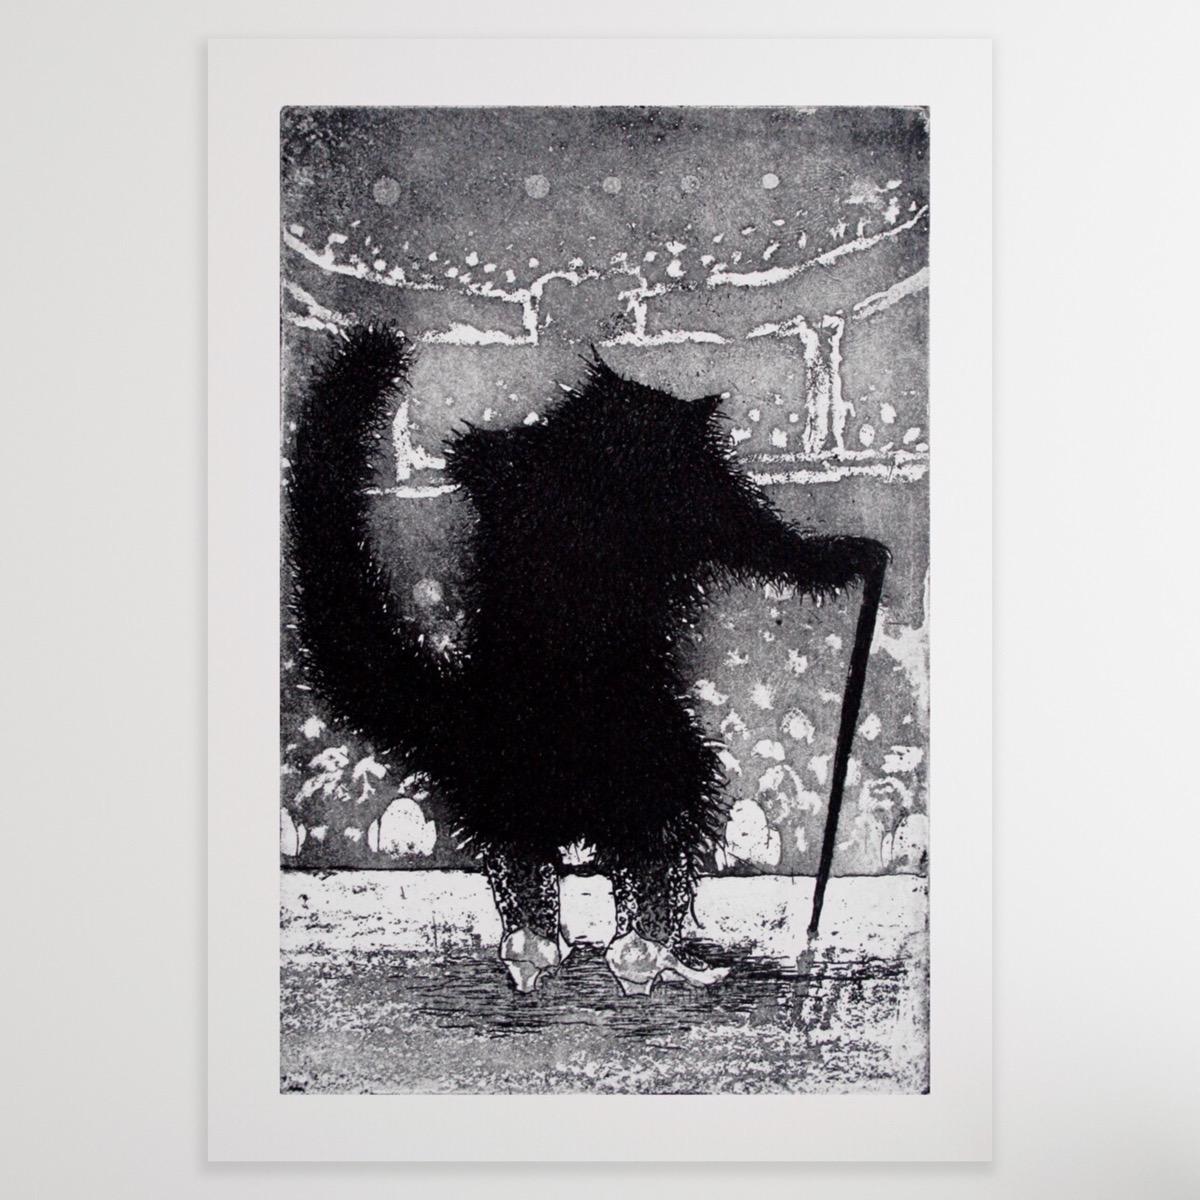 Old Puss in Boots' by Tim Southall. Old Puss in Boots is a seasoned performer, spinning tales to a packed theatre audience. Once sprightly, he now stands with a cane, but age has not diminished him. He is still a star! This etching and aquatint by